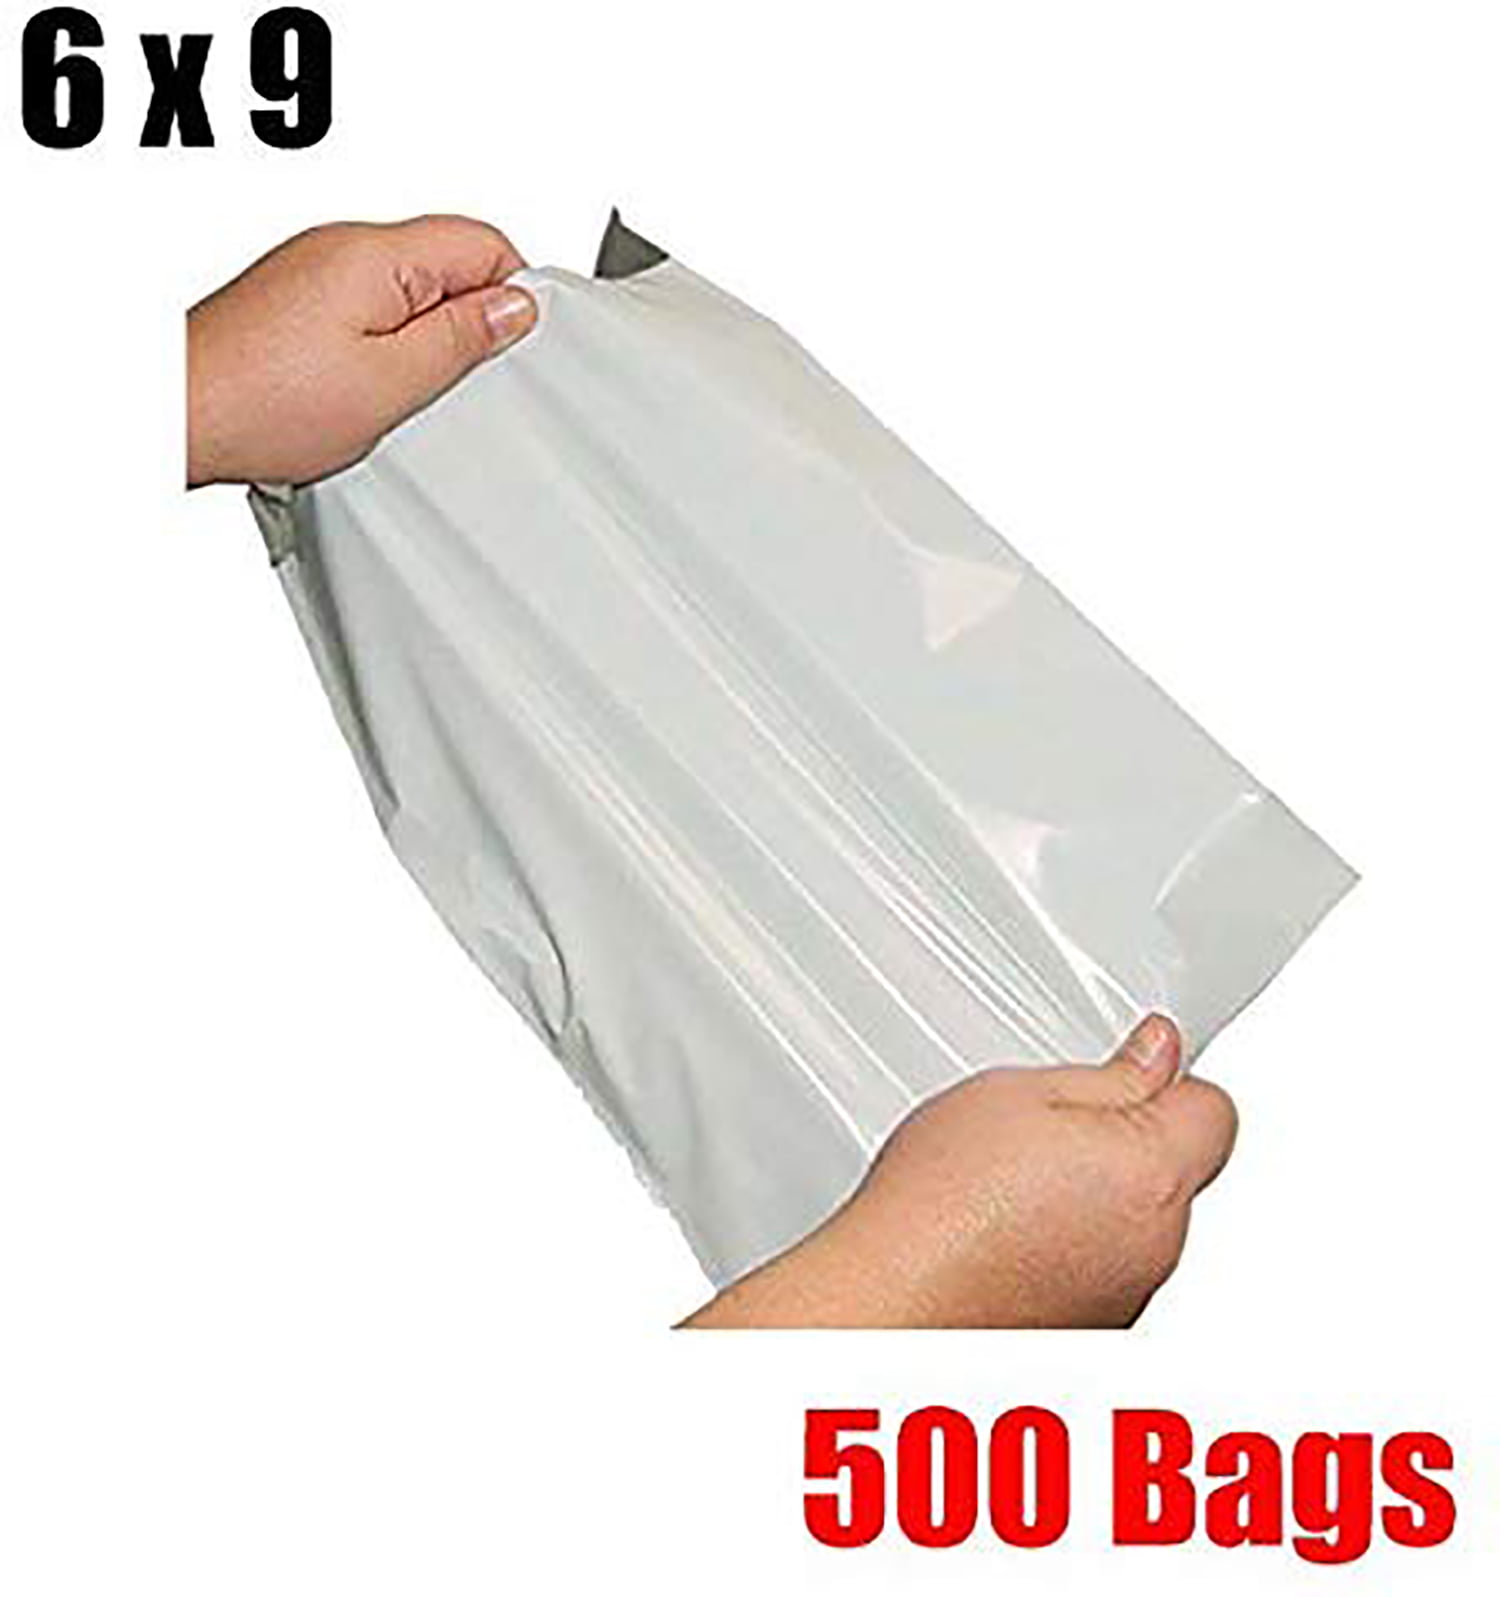 500 Bags 200 6x9 & 300 9x12 Poly Mailers 